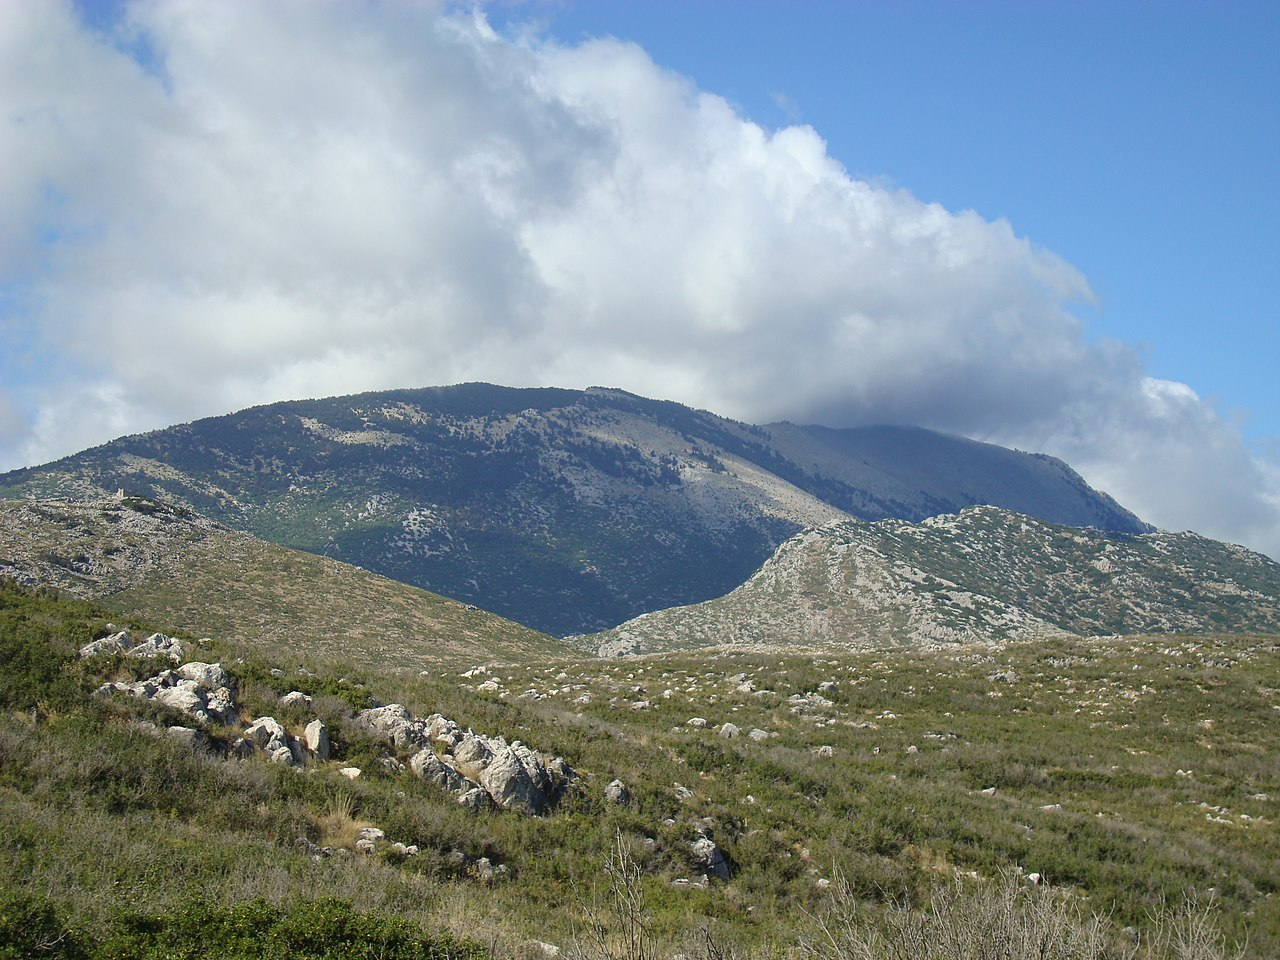 Mount Gelion above the village of Askra in Boeotia